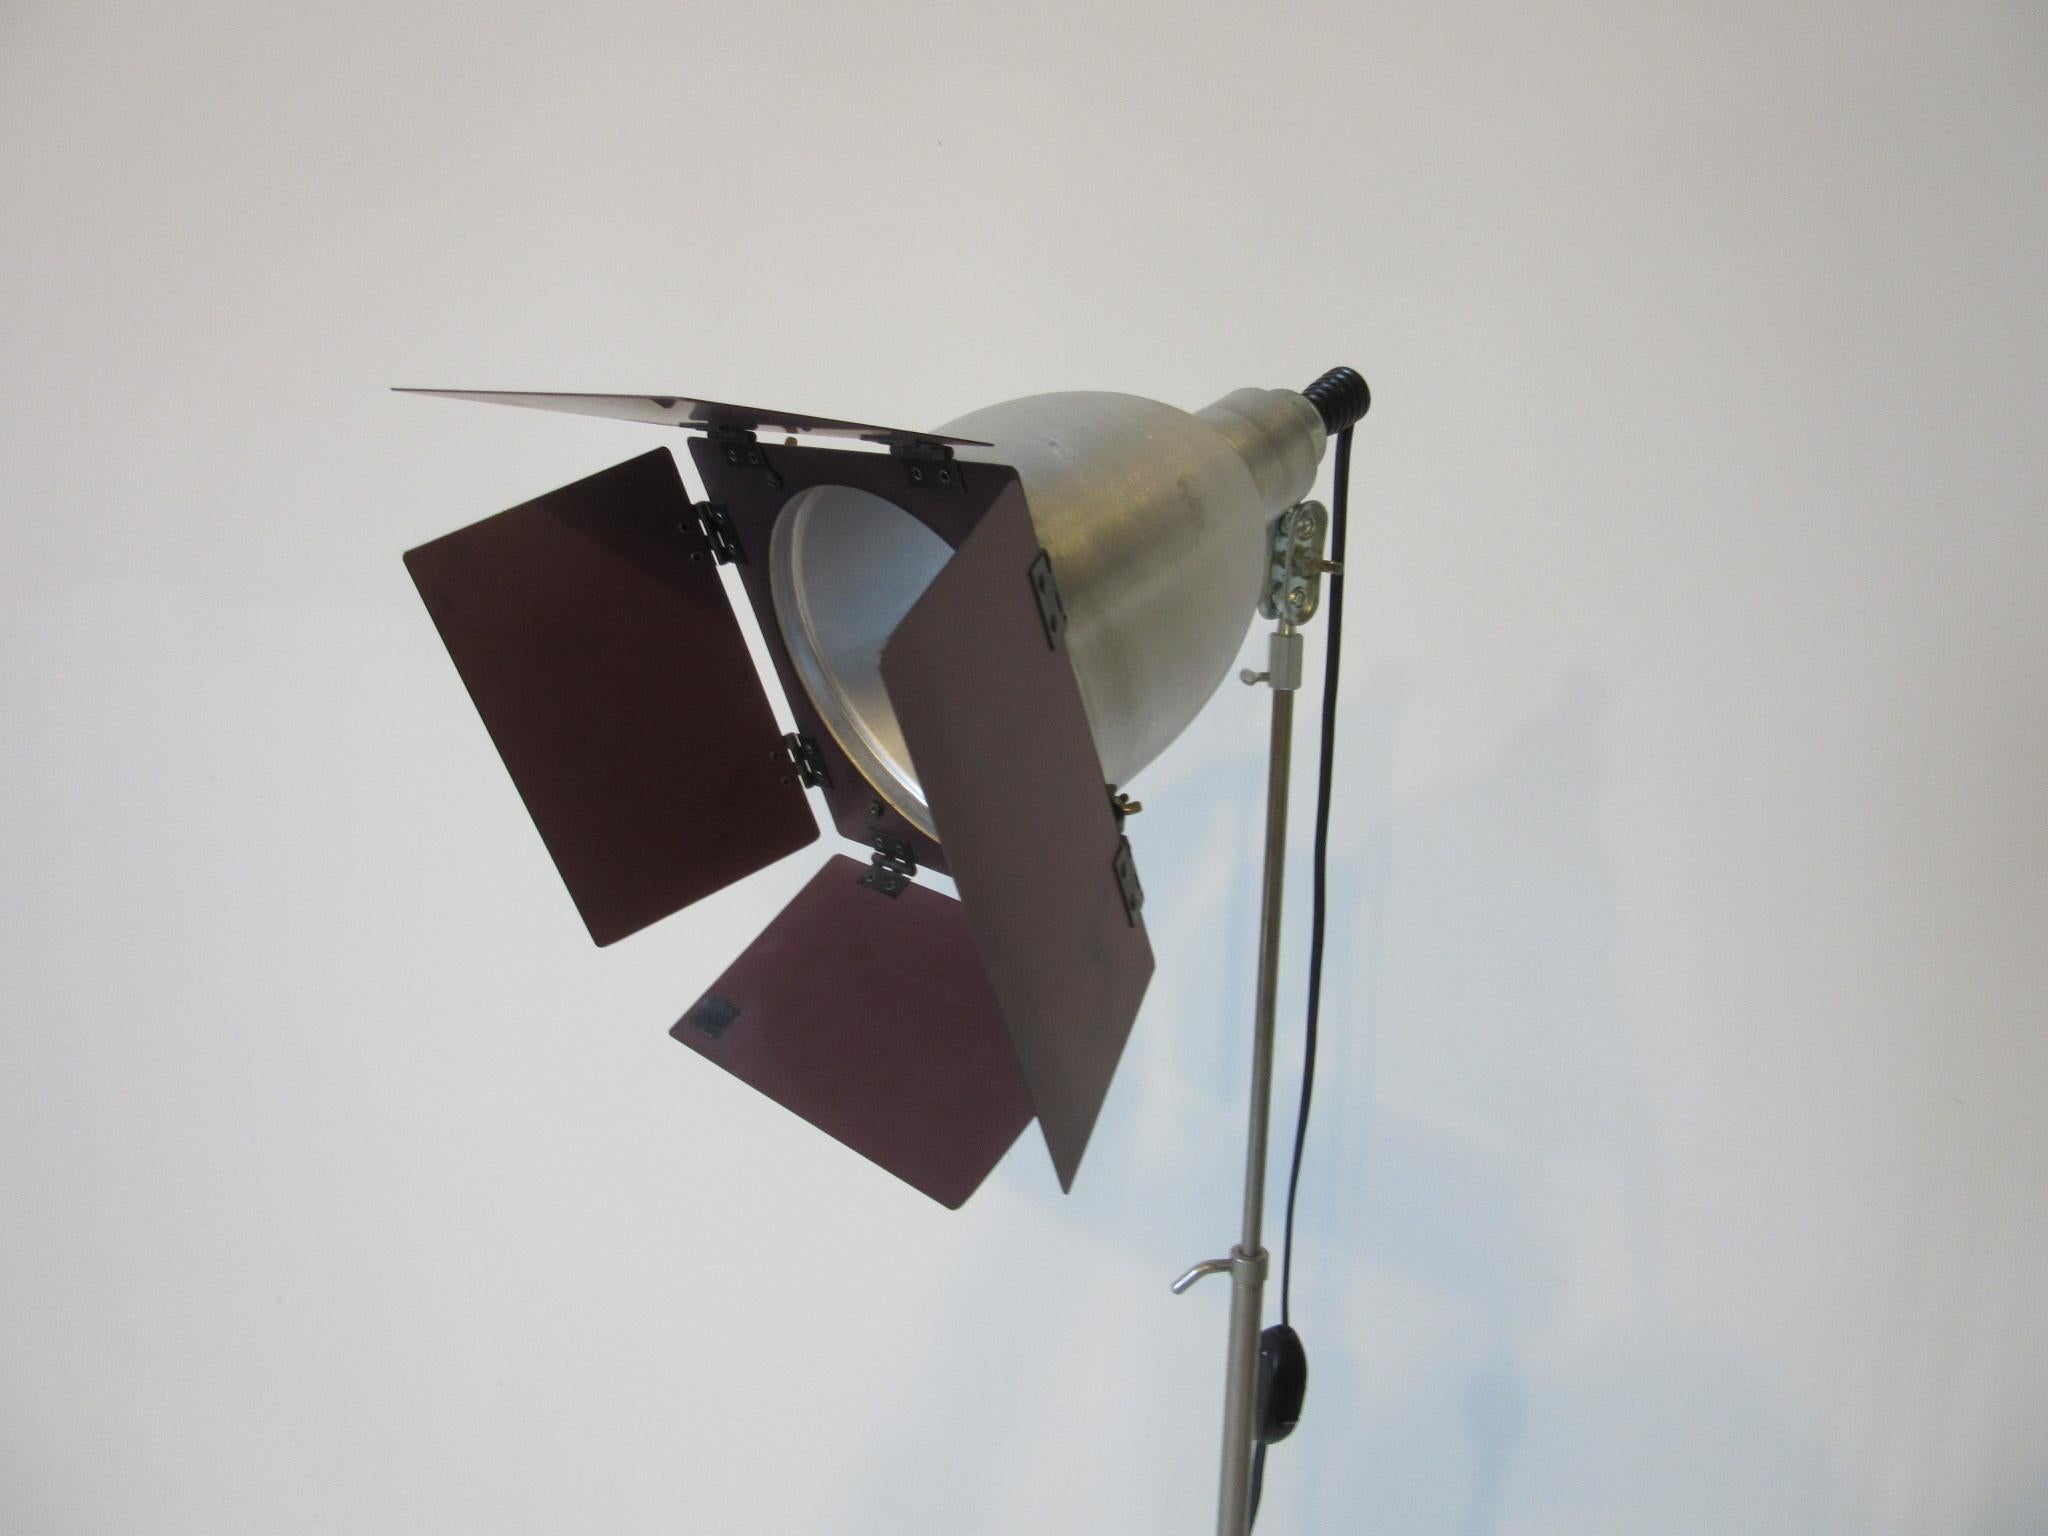 A Machine Age Art Deco styled Industrial floor lamp with folding anodized metal shades to the lamp head in brushed aluminum with steel tri - folding legs. Has a adjustable head and shaft manufactured by the Smith - Victor Company. Great floor lamp